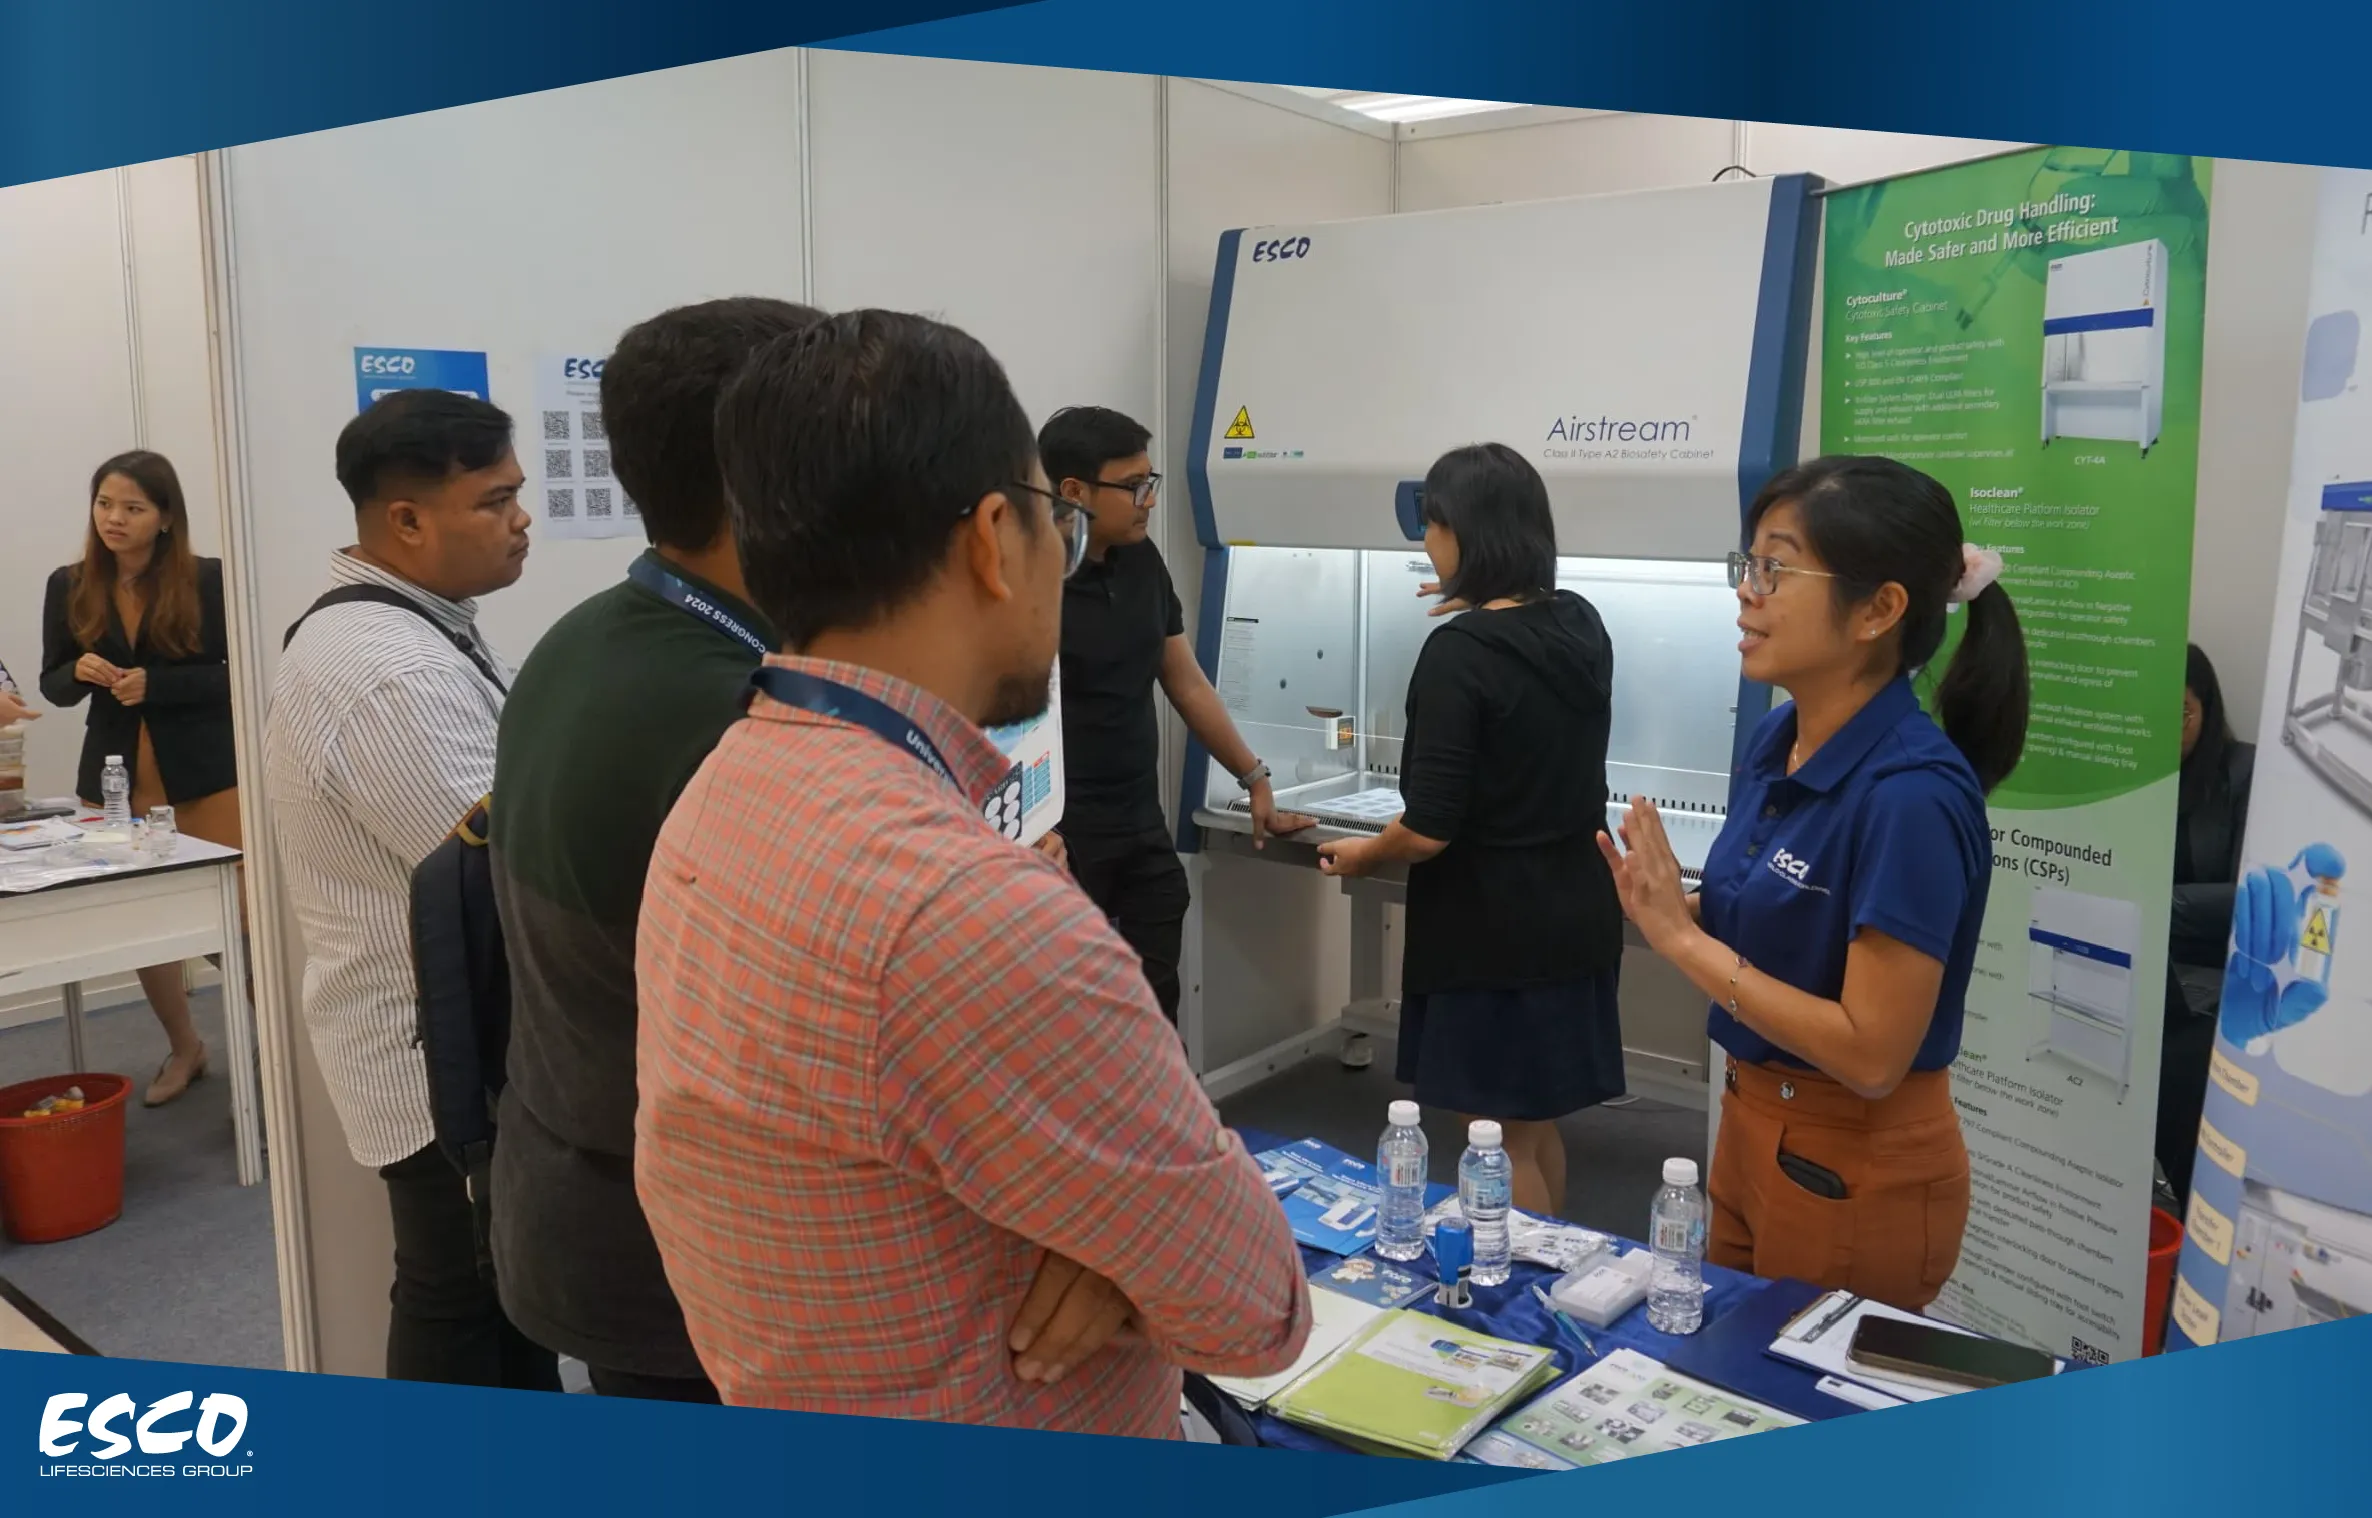 Esco Malaysia's Highlight Moment at the Hospital Aseptic Dispensing Congress 2024